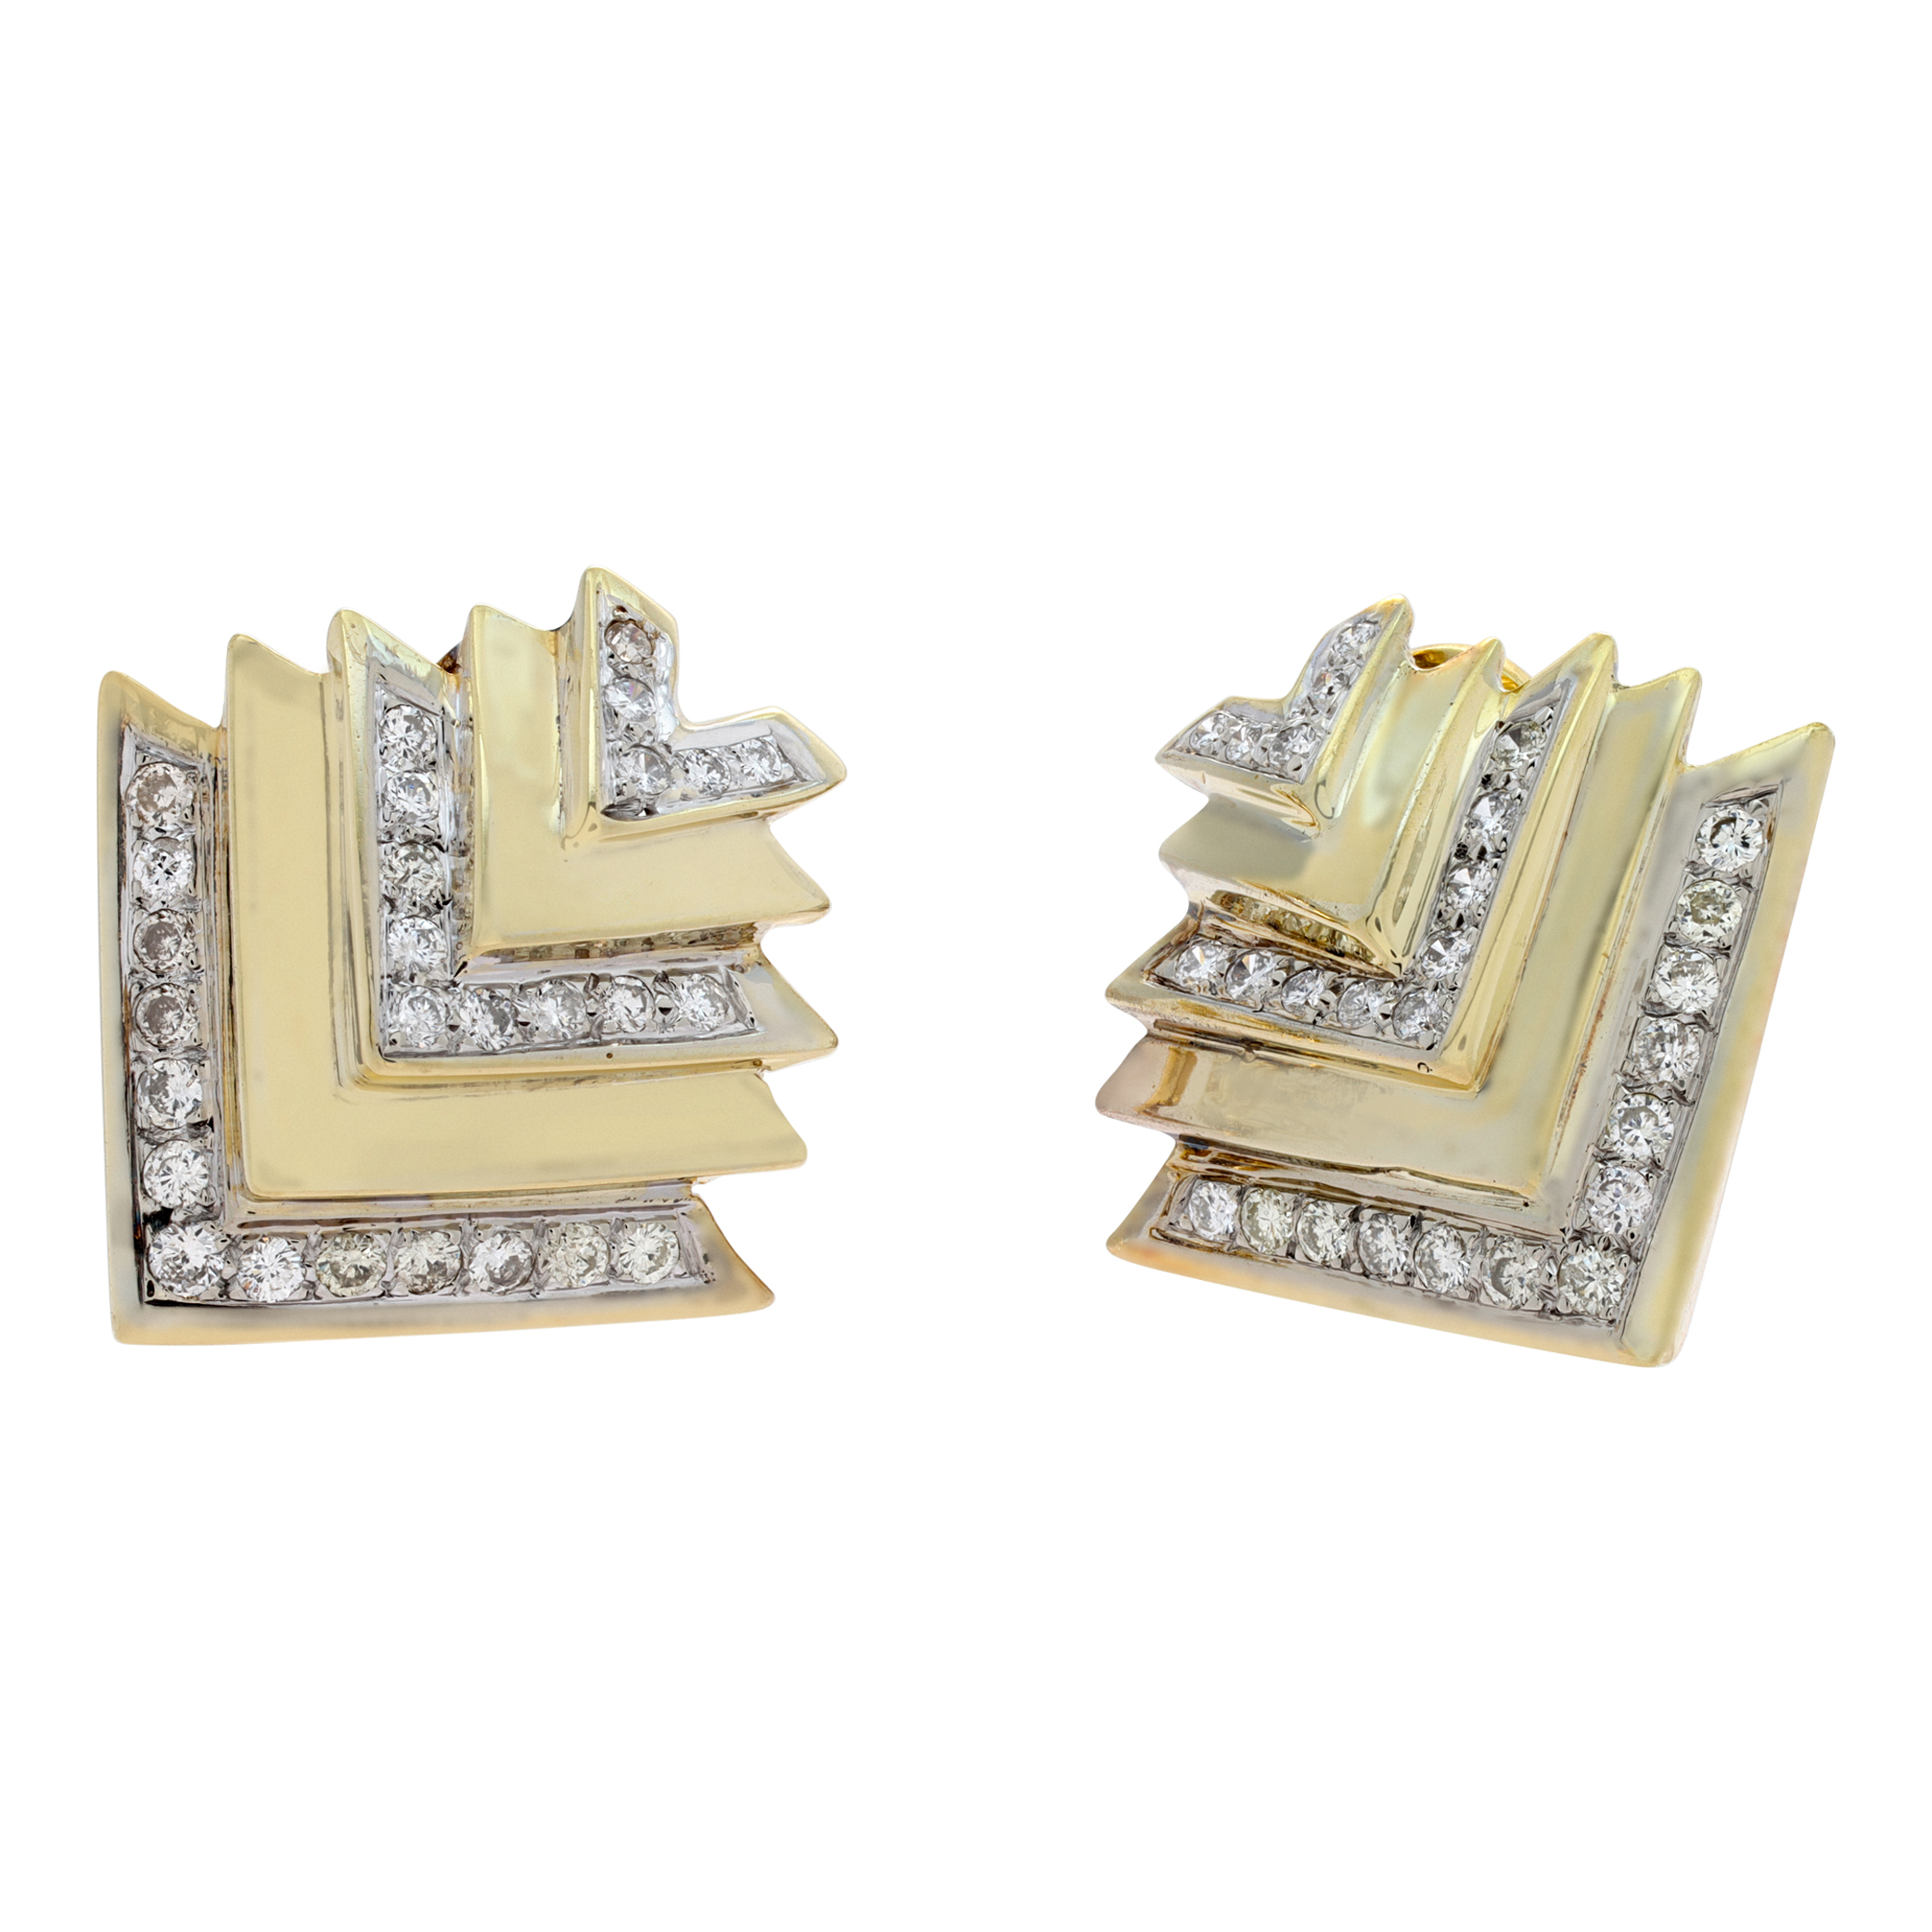 Modernist, Diamond earrings in 14k yellow gold. Round brilliant cut diamonds total approx. weight: 1.00 carat, (Stones)